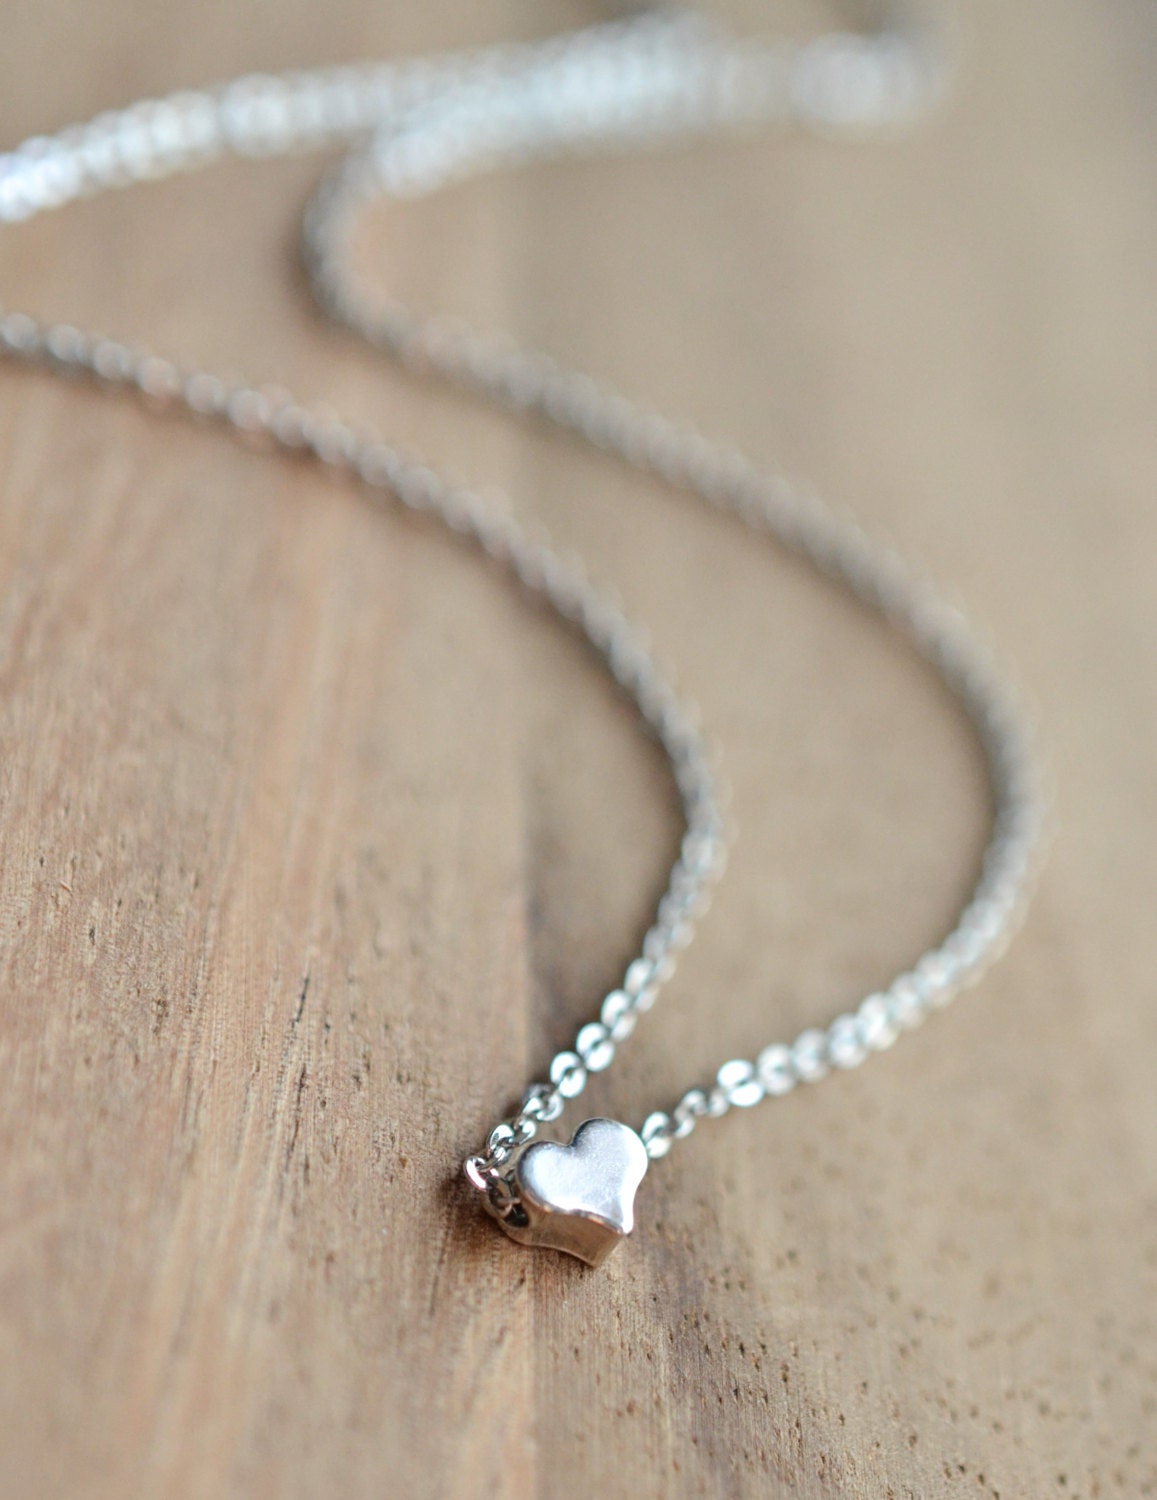 Silver Tiny Heart Necklace - Bridesmaid Gift - Minimalist Everyday Jewelry - Silver Mini Heart Necklace - Simple Gift Idea